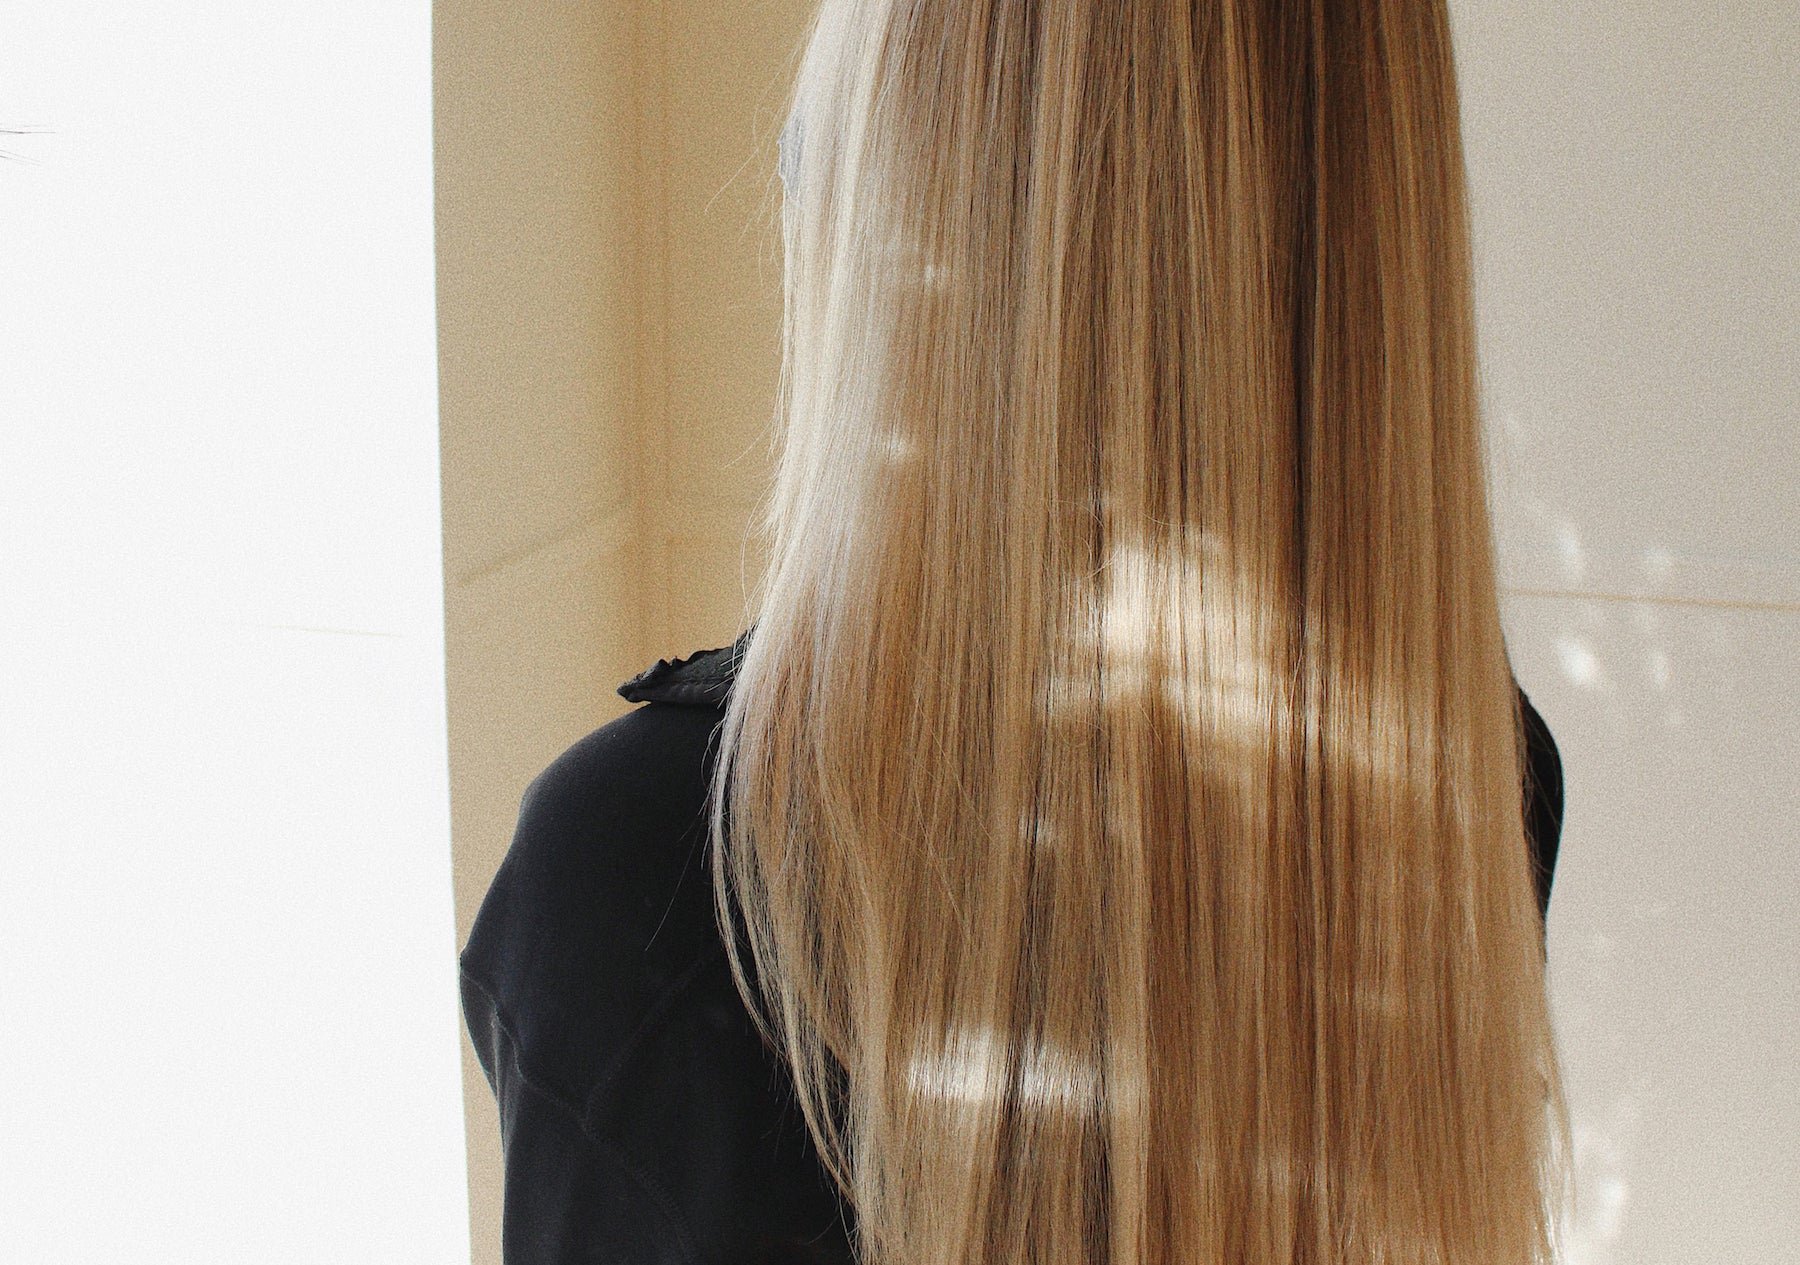 How to make your hair grow faster tips tricks Davines